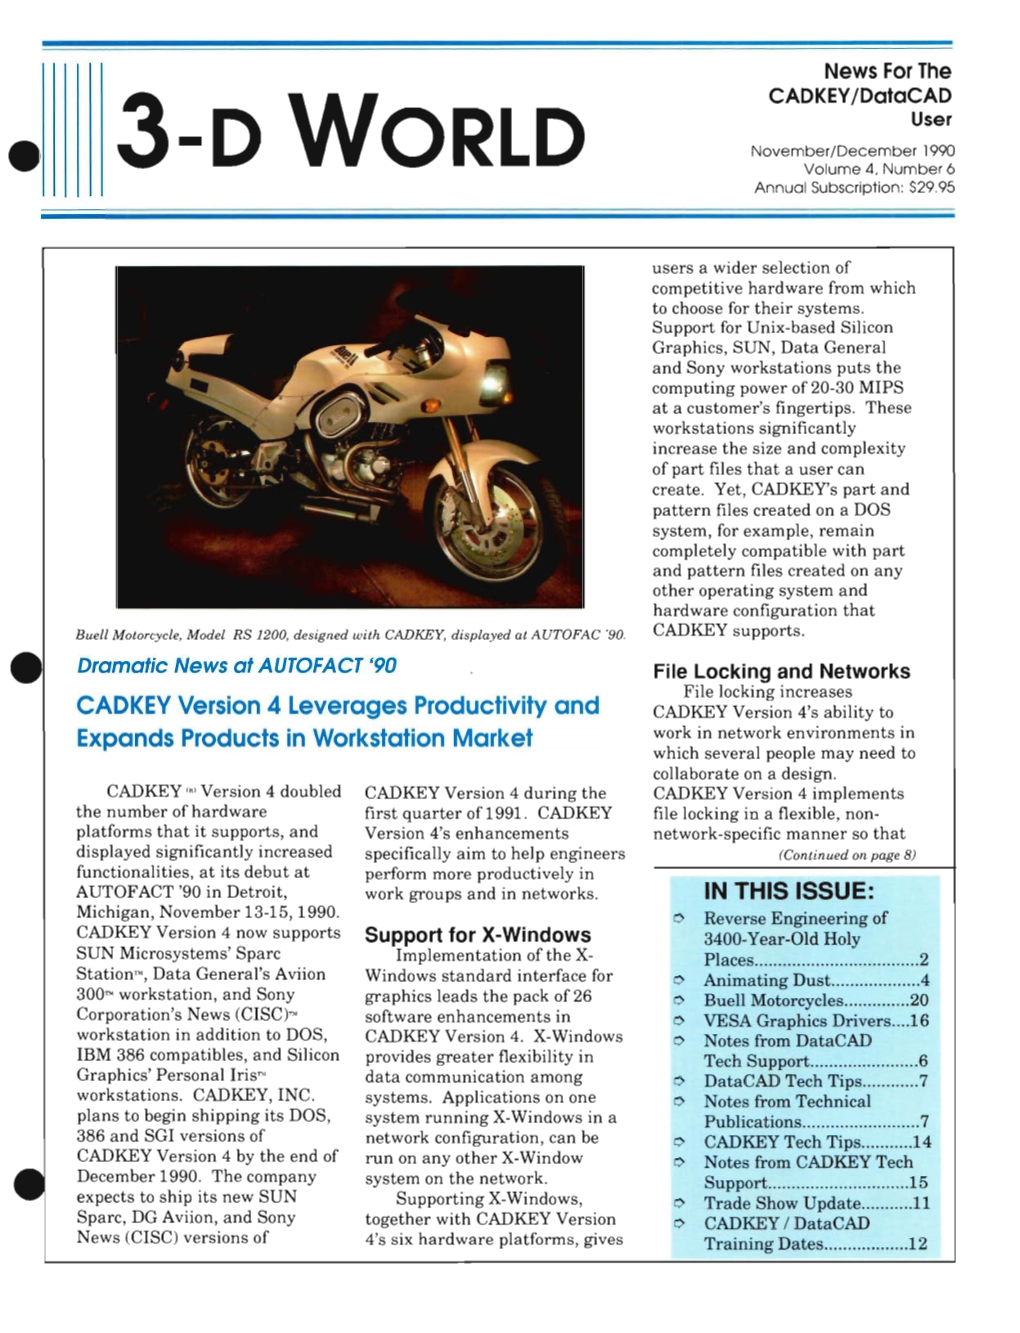 3-D WORLD Volume 4, Number 6 Annual Subscription: $29.95